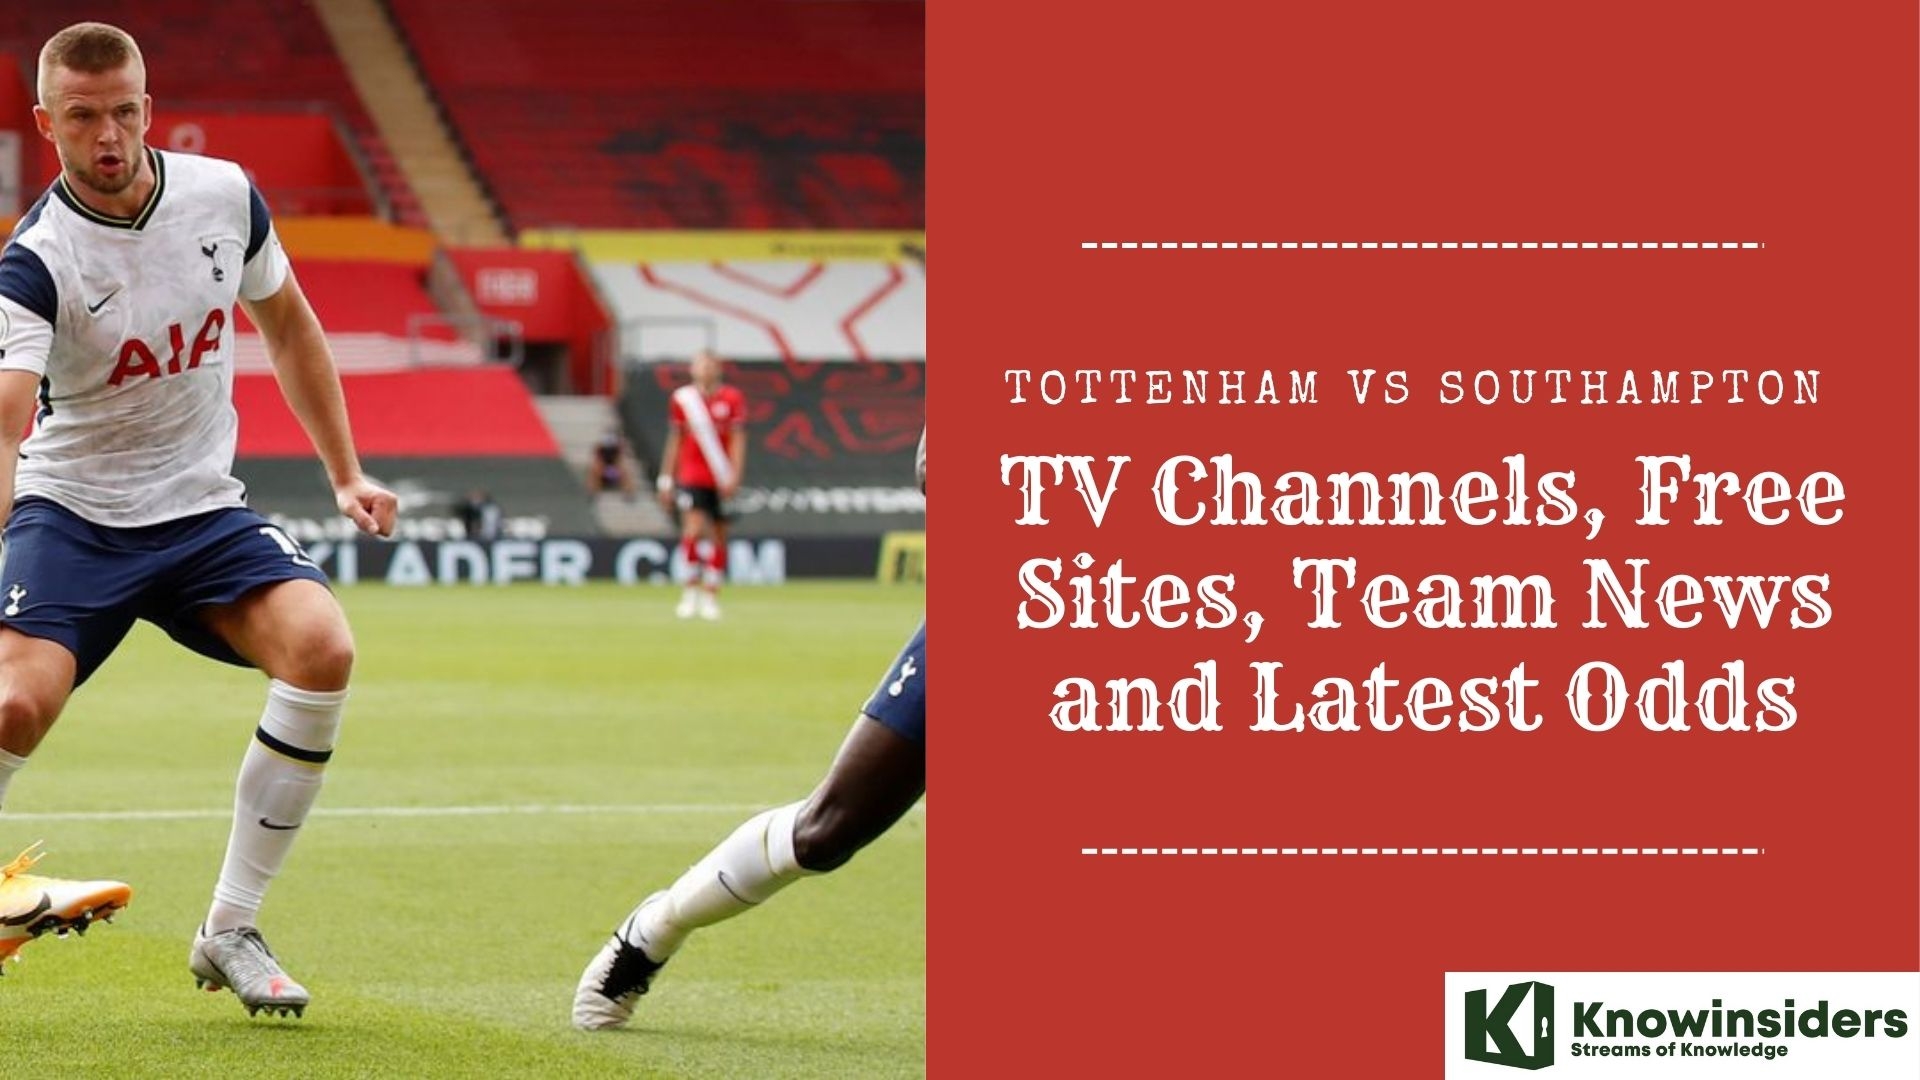 Tottenham vs Southampton Prediction: TV Channels, Free Sites, Team News and Latest Odds